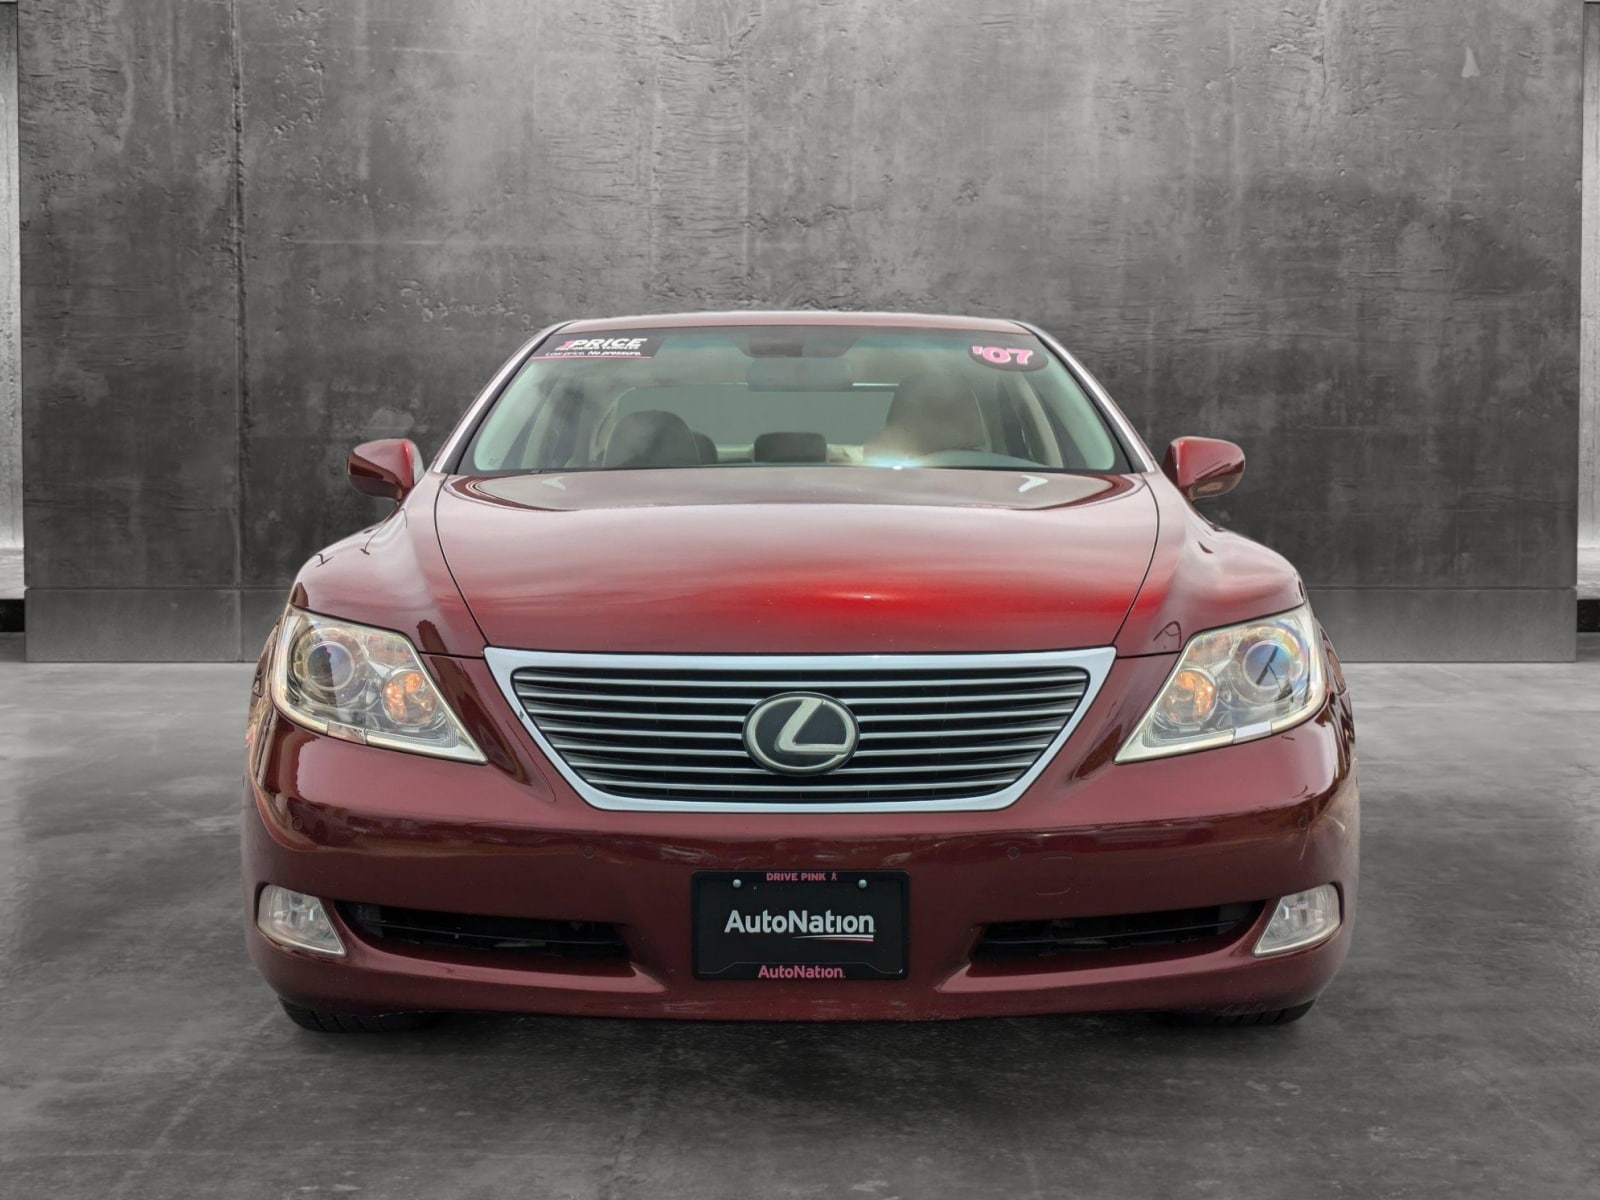 Used 2007 Lexus LS Base with VIN JTHBL46FX75033246 for sale in Carlsbad, CA